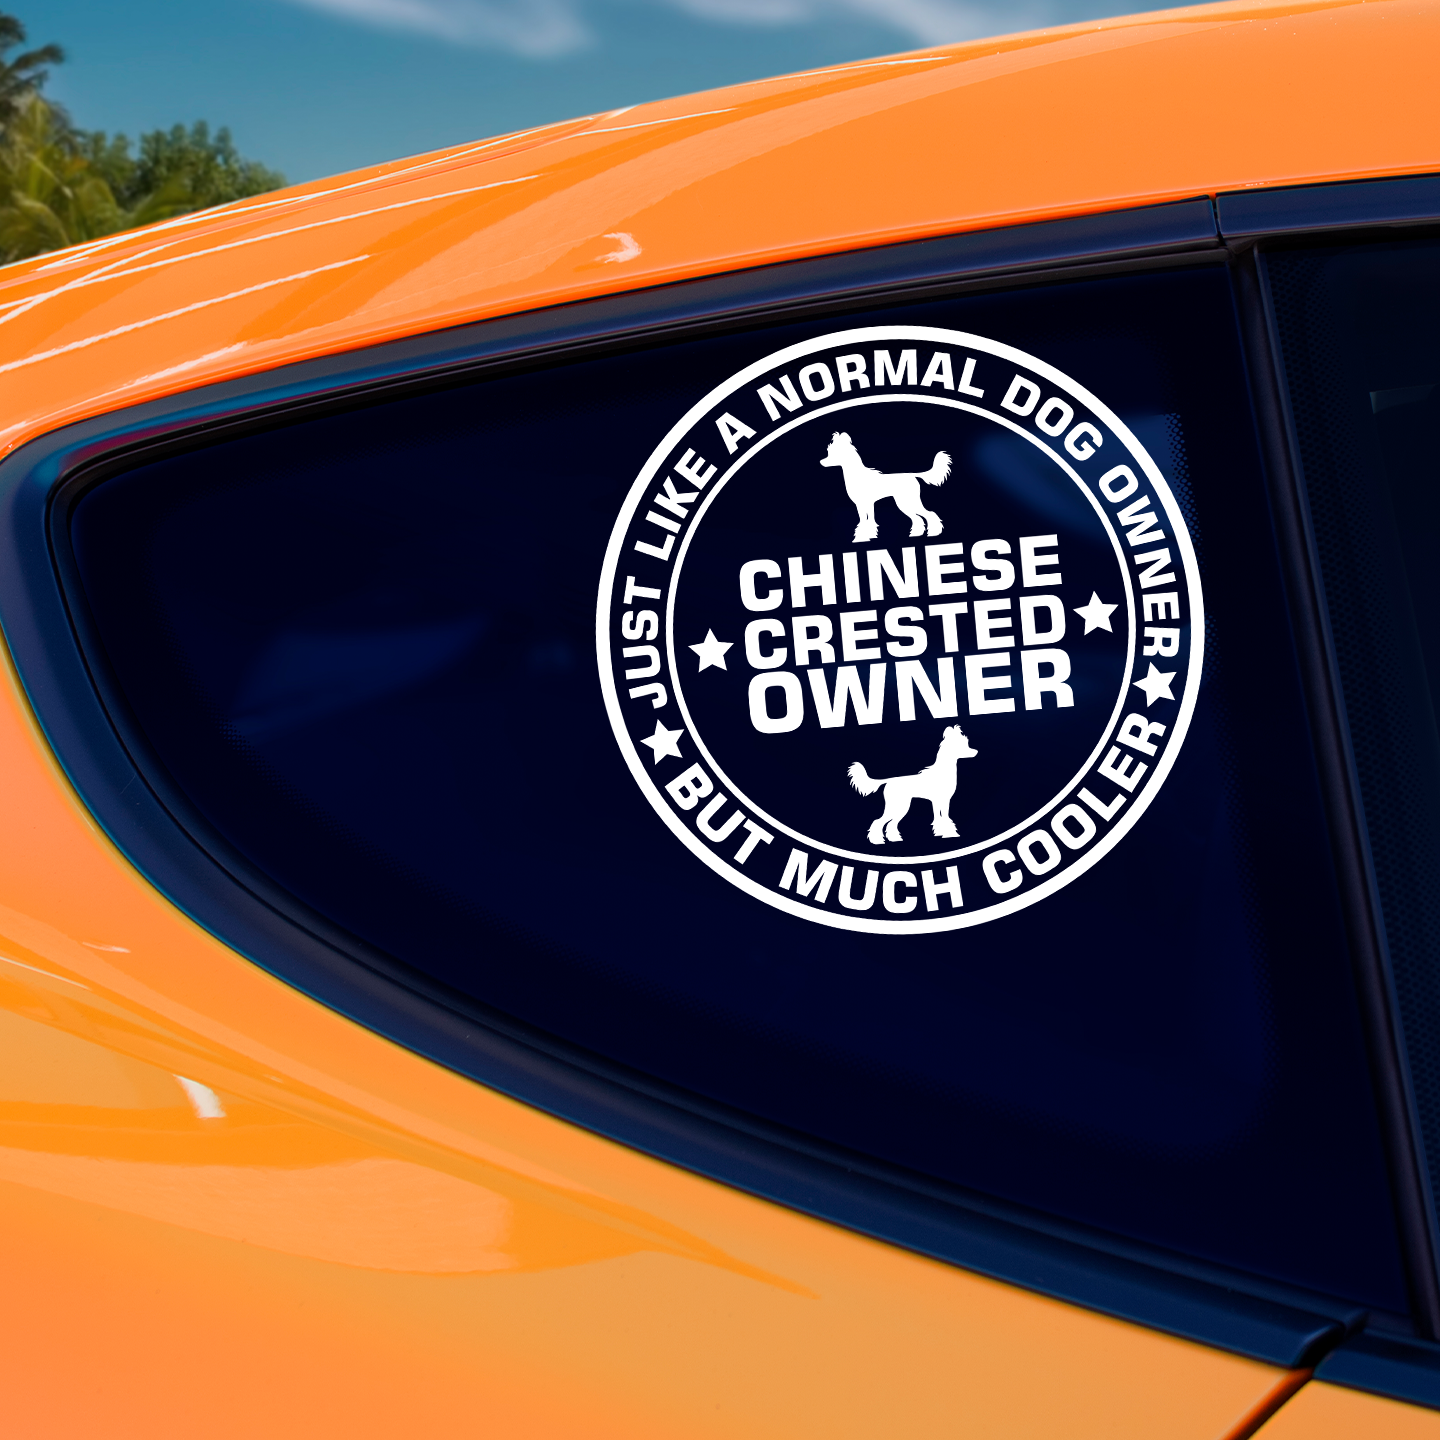 Chinese Crested Owner Sticker